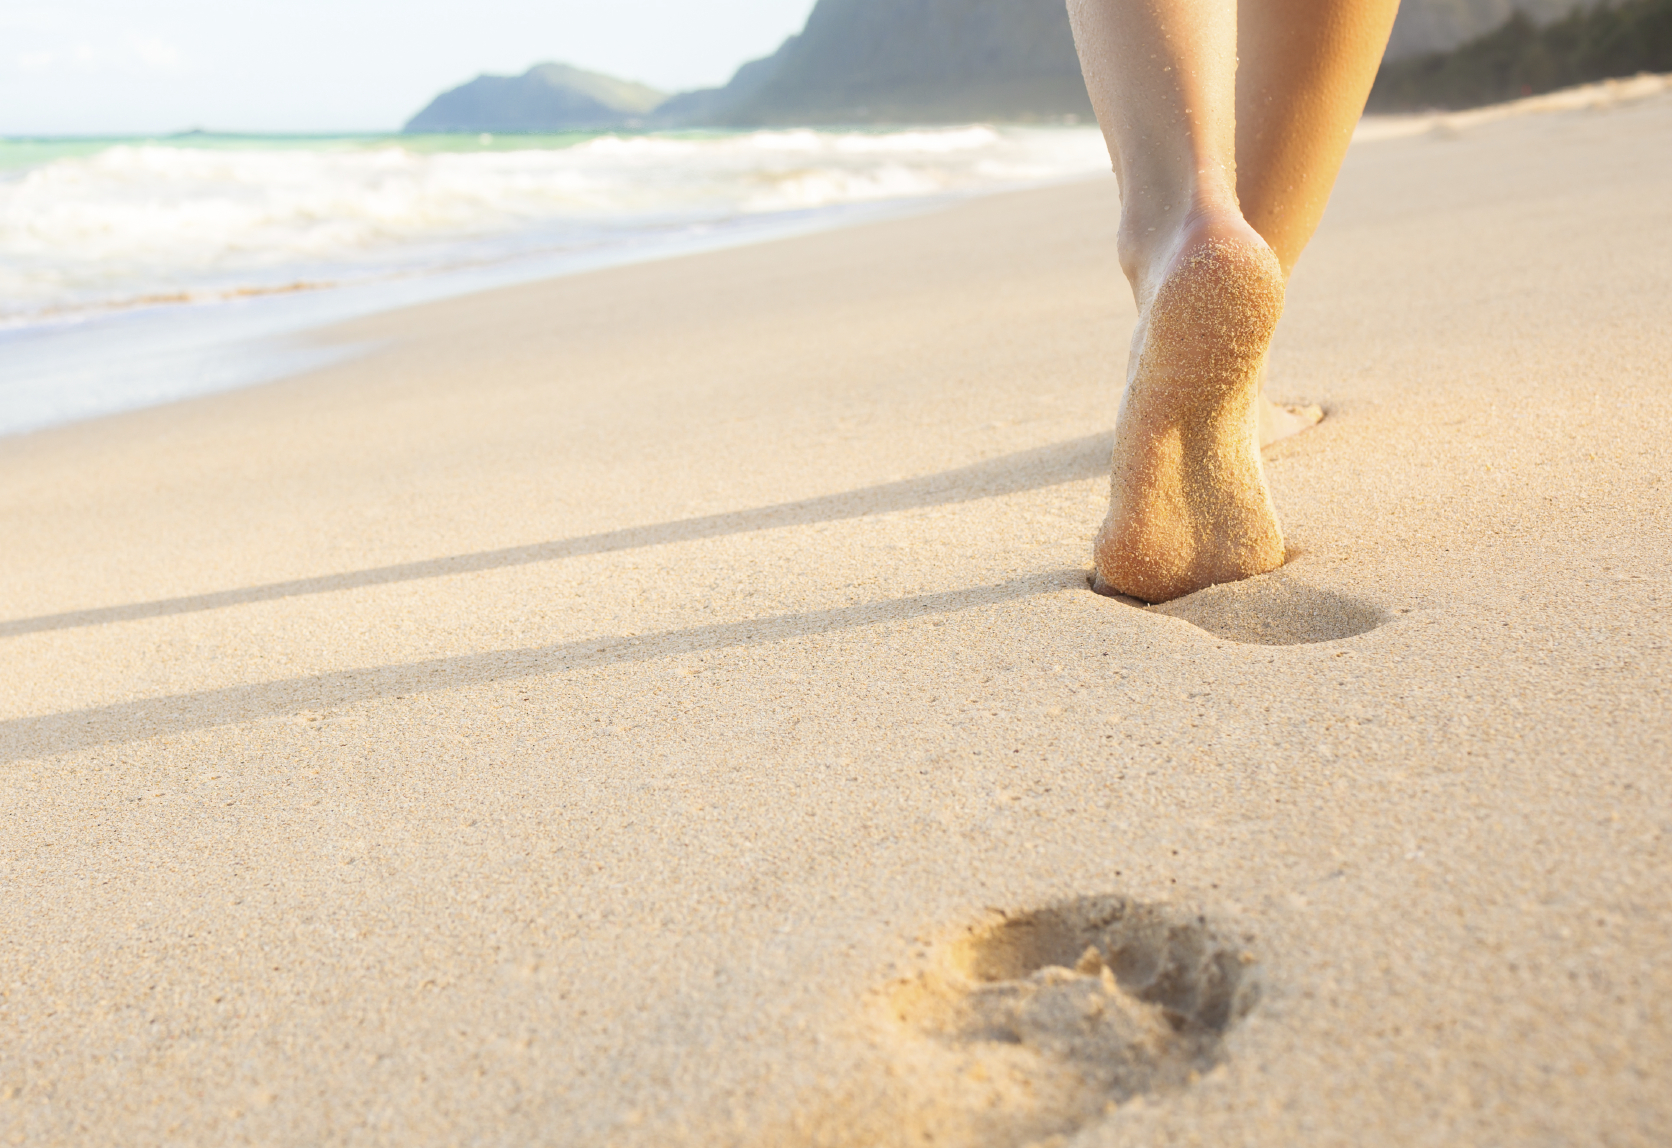 Take a Step Toward Better Diabetic Foot Care